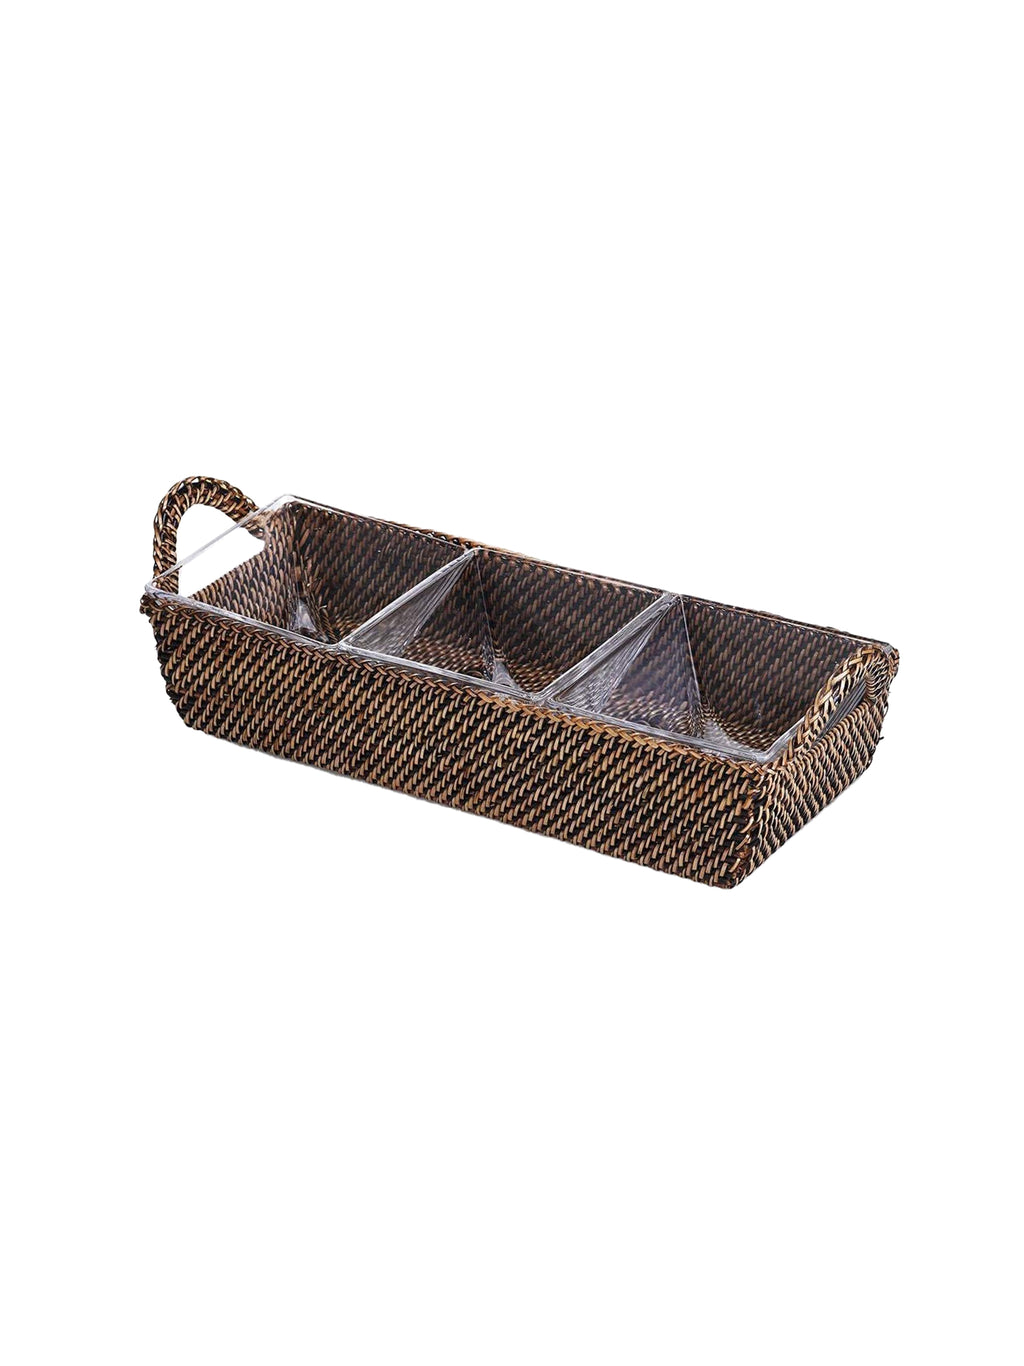 Rattan Rectangular Server with 3 Glass Dishes